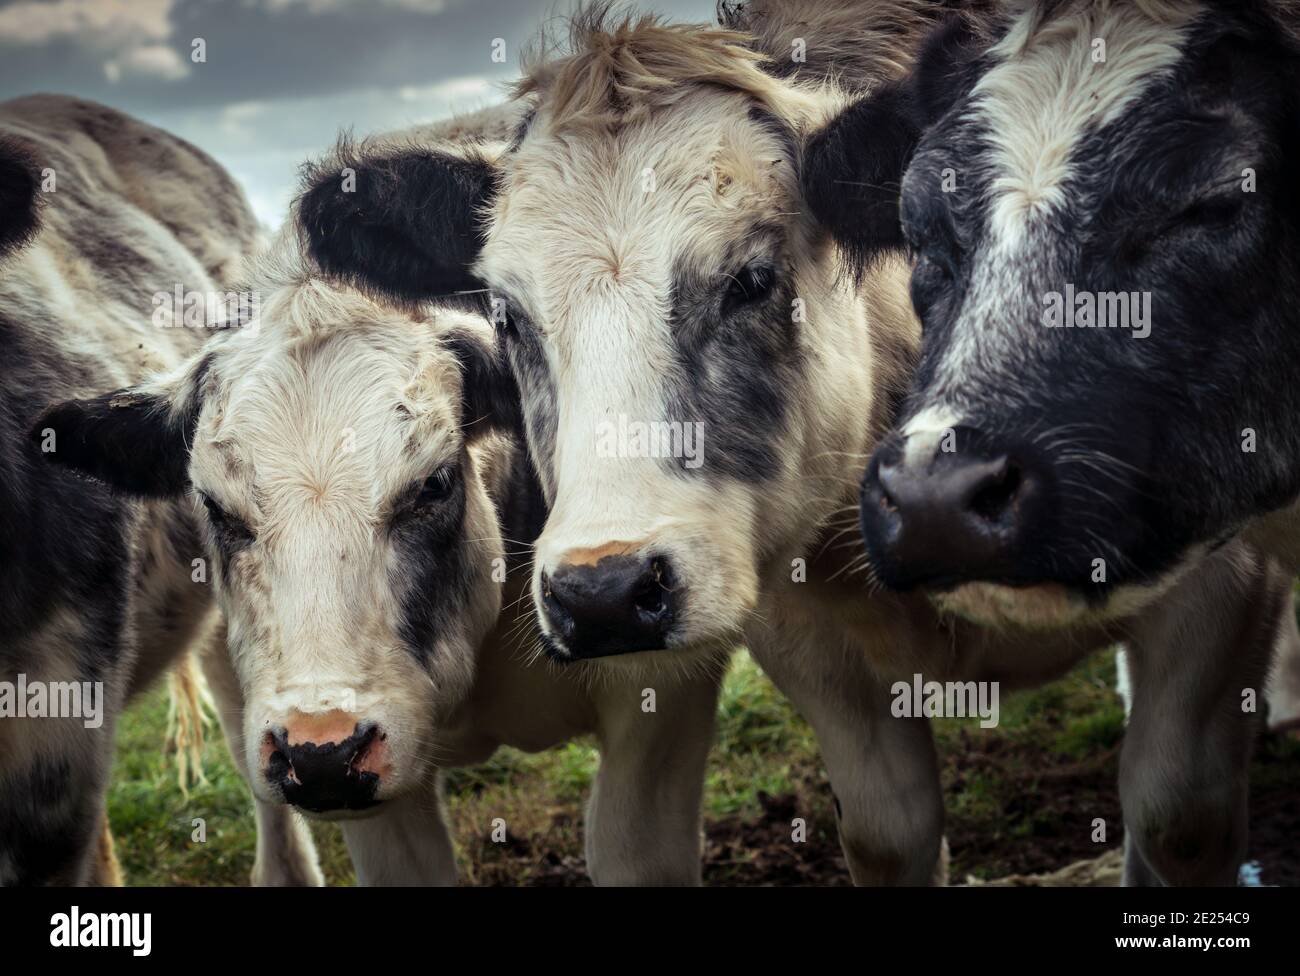 Curious shaggy cows huddled together on a cold autumn day in the dutch countryside Stock Photo